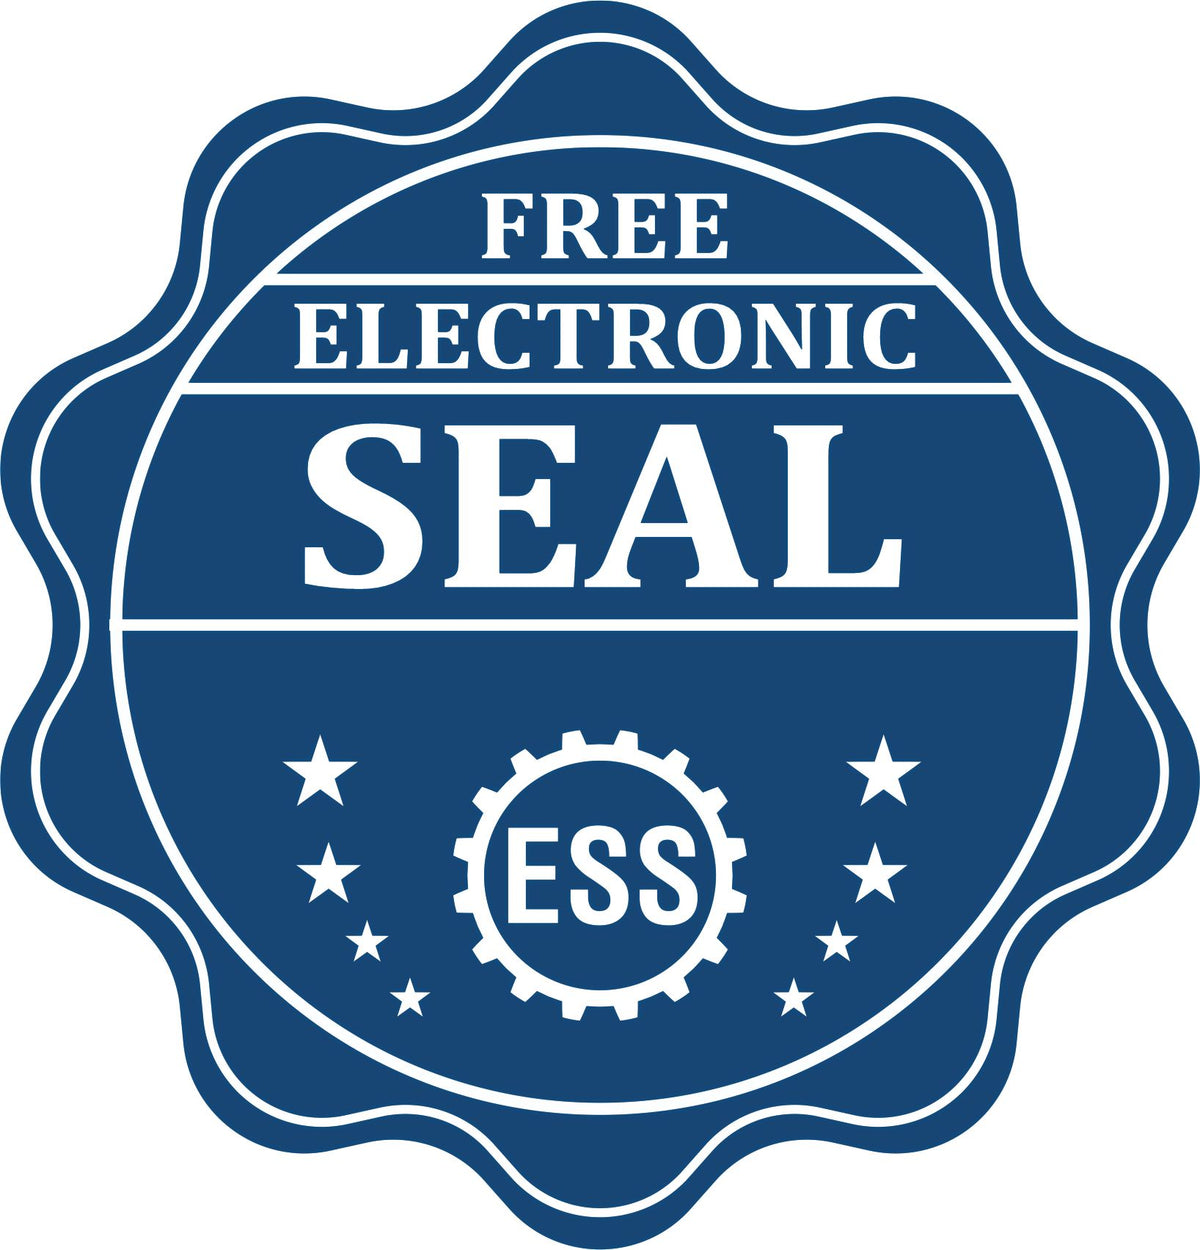 A badge showing a free electronic seal for the Hybrid Vermont Engineer Seal with stars and the ESS gear on the emblem.